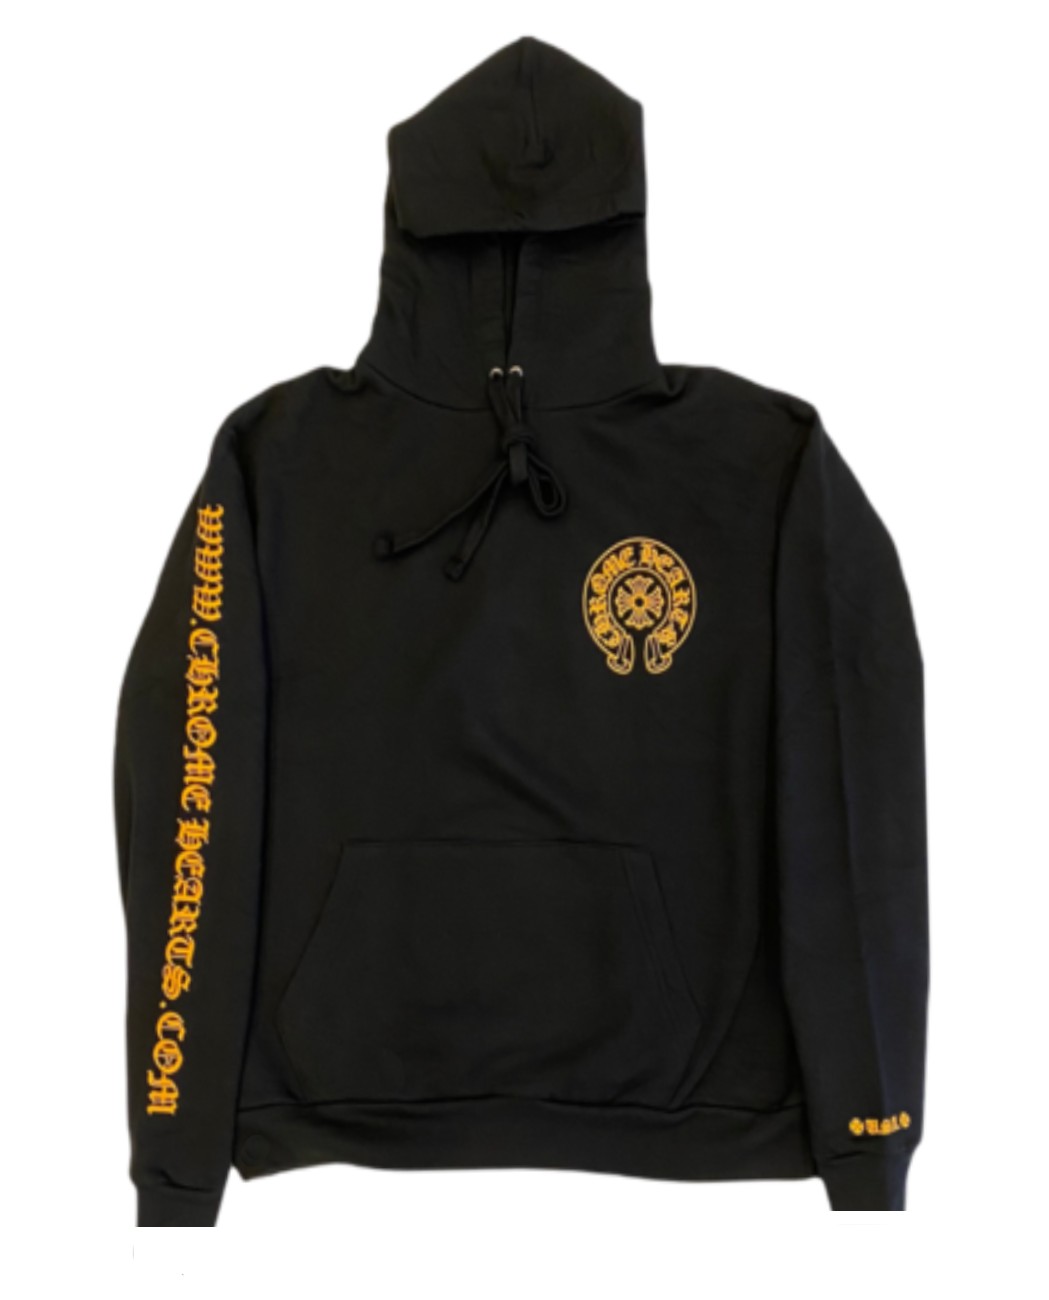 Brand New Chrome Hearts “Mapplethorpe” Online Exclusive Hoodie